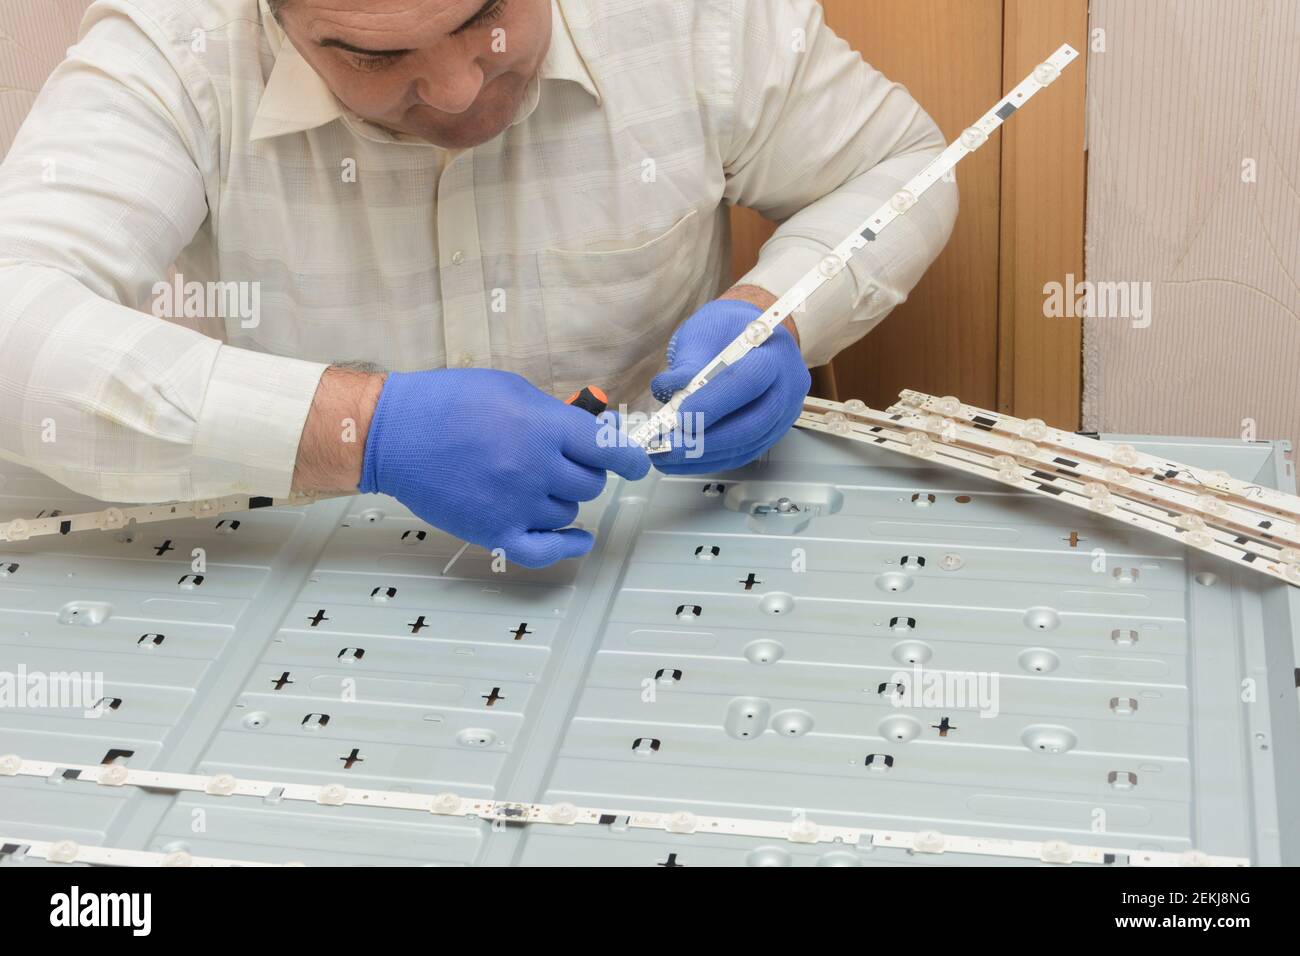 Repair of LCD TV in service center. Master removes LED strips with lamps from monitor case. Stock Photo